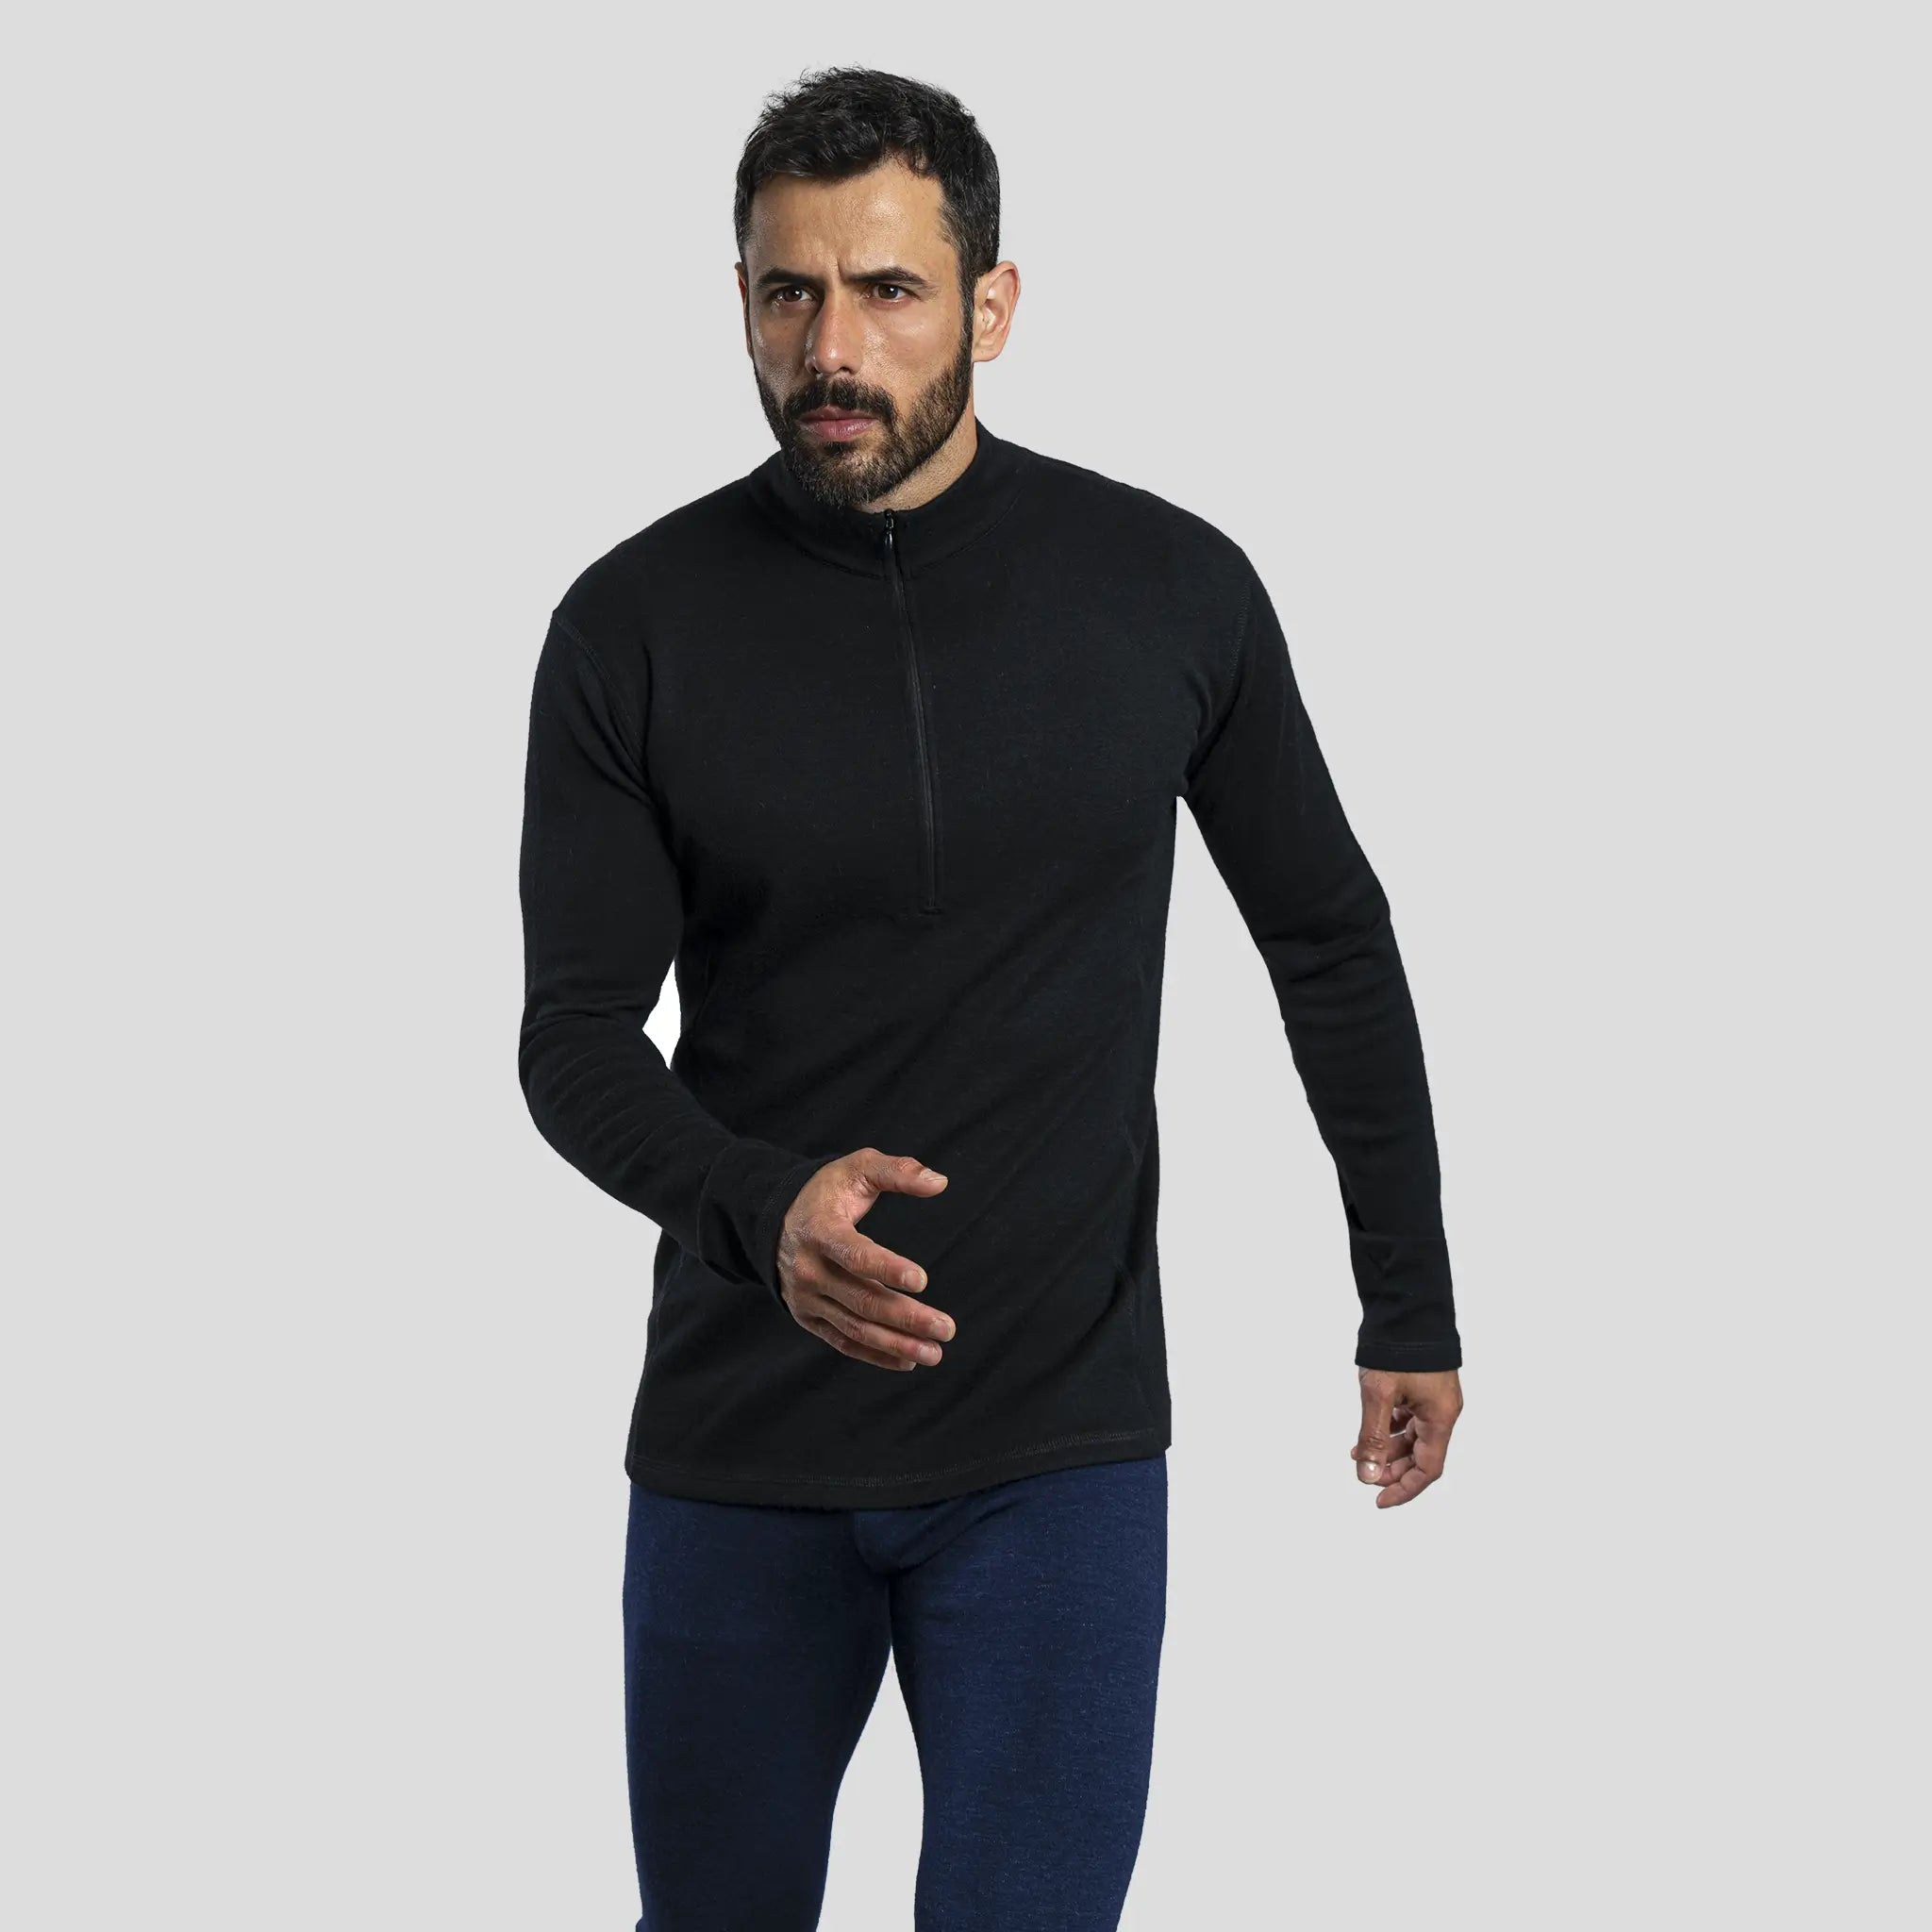 Men's Alpaca Wool Base Layers & THERMALS for Outdoor Sports – Arms of Andes